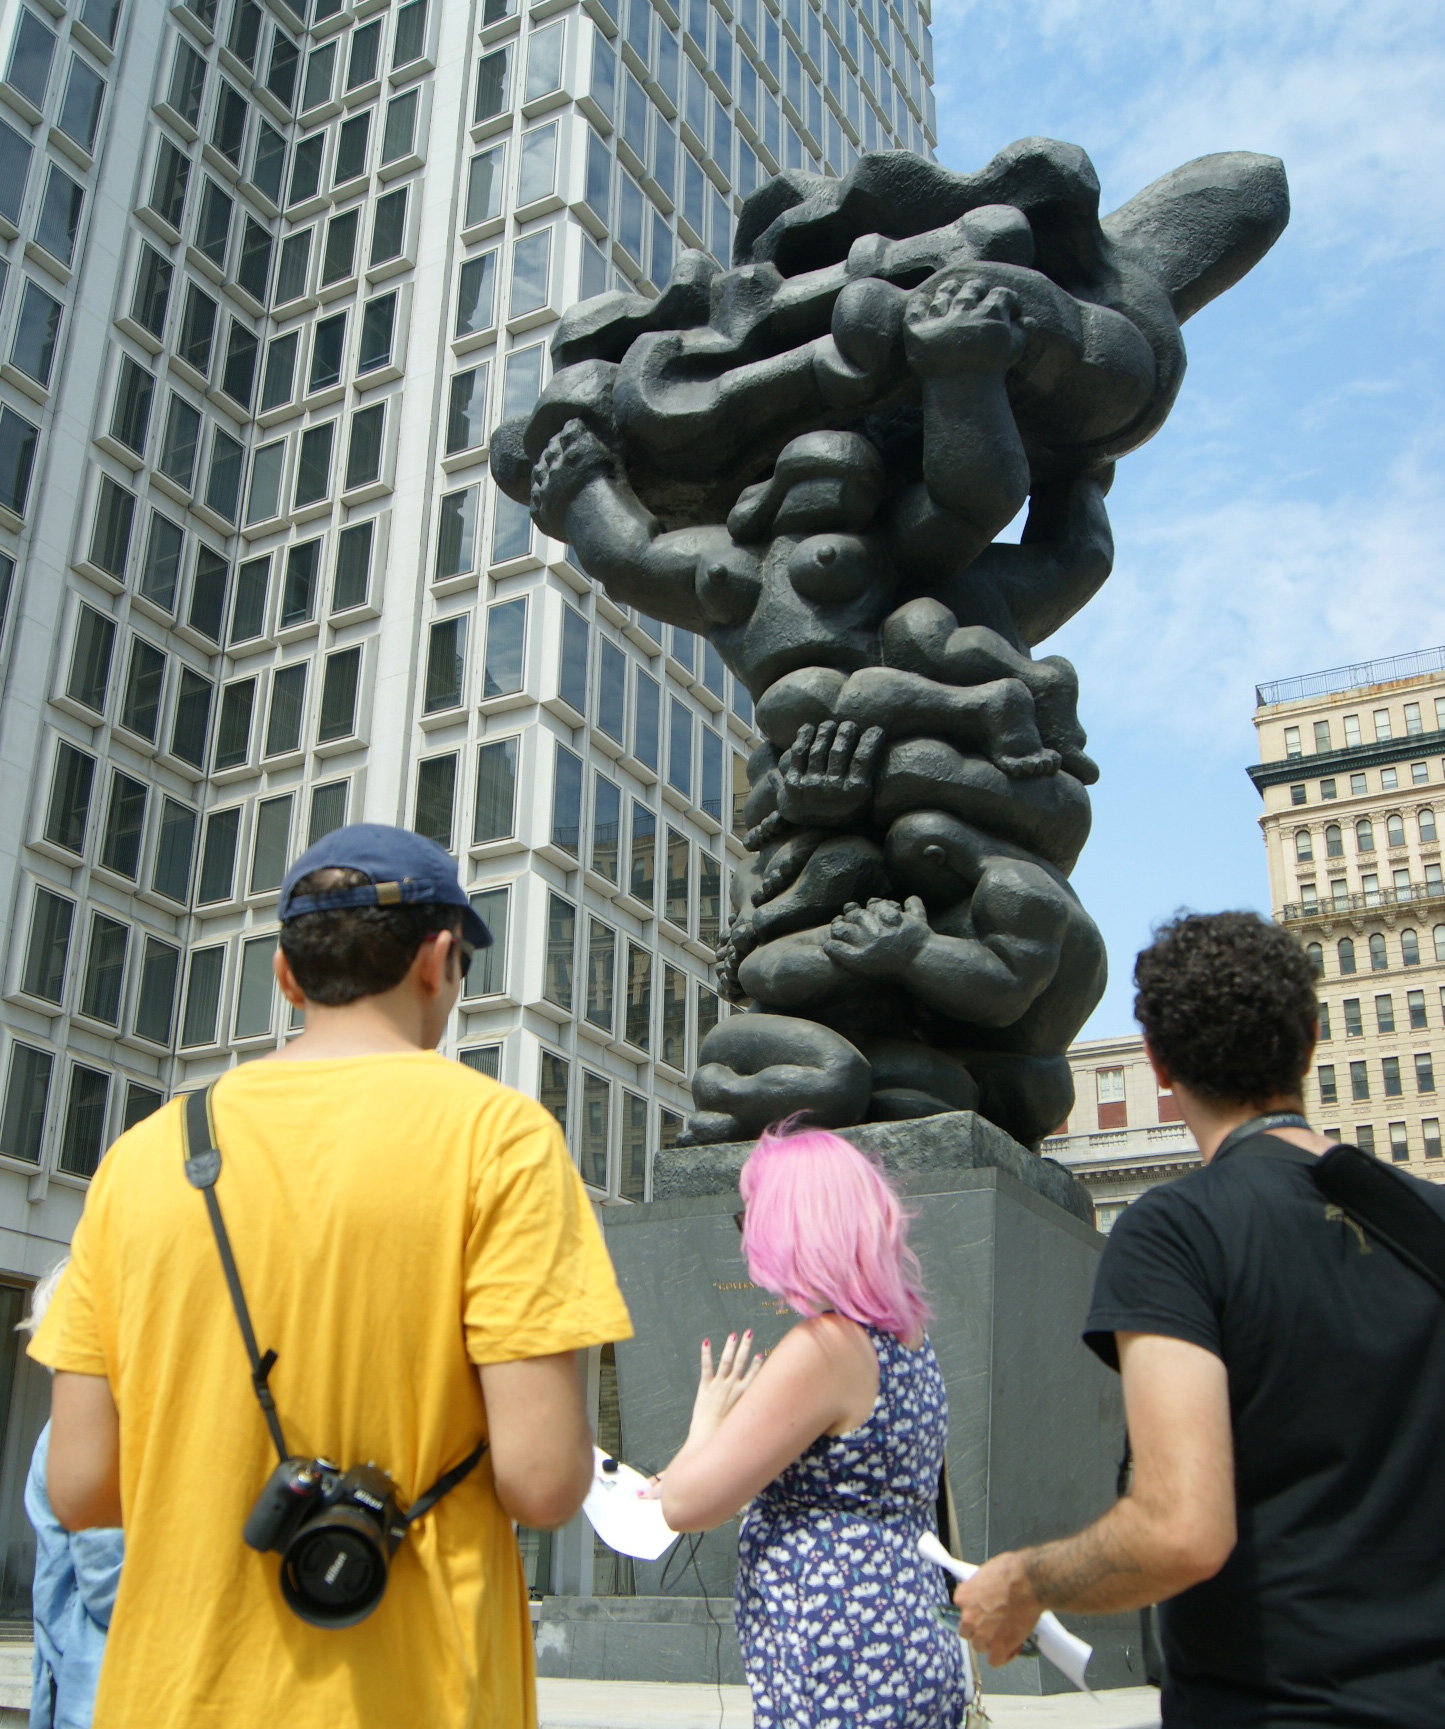 Three people participating in a public art photography workshop at the massive bronze Jacques Lipchitz "Government of the People" sculpture in Center City Philadelphia. The instructor is a woman with pink hair in the center and she is talking about the sculpture. Two men with their cameras are listening.